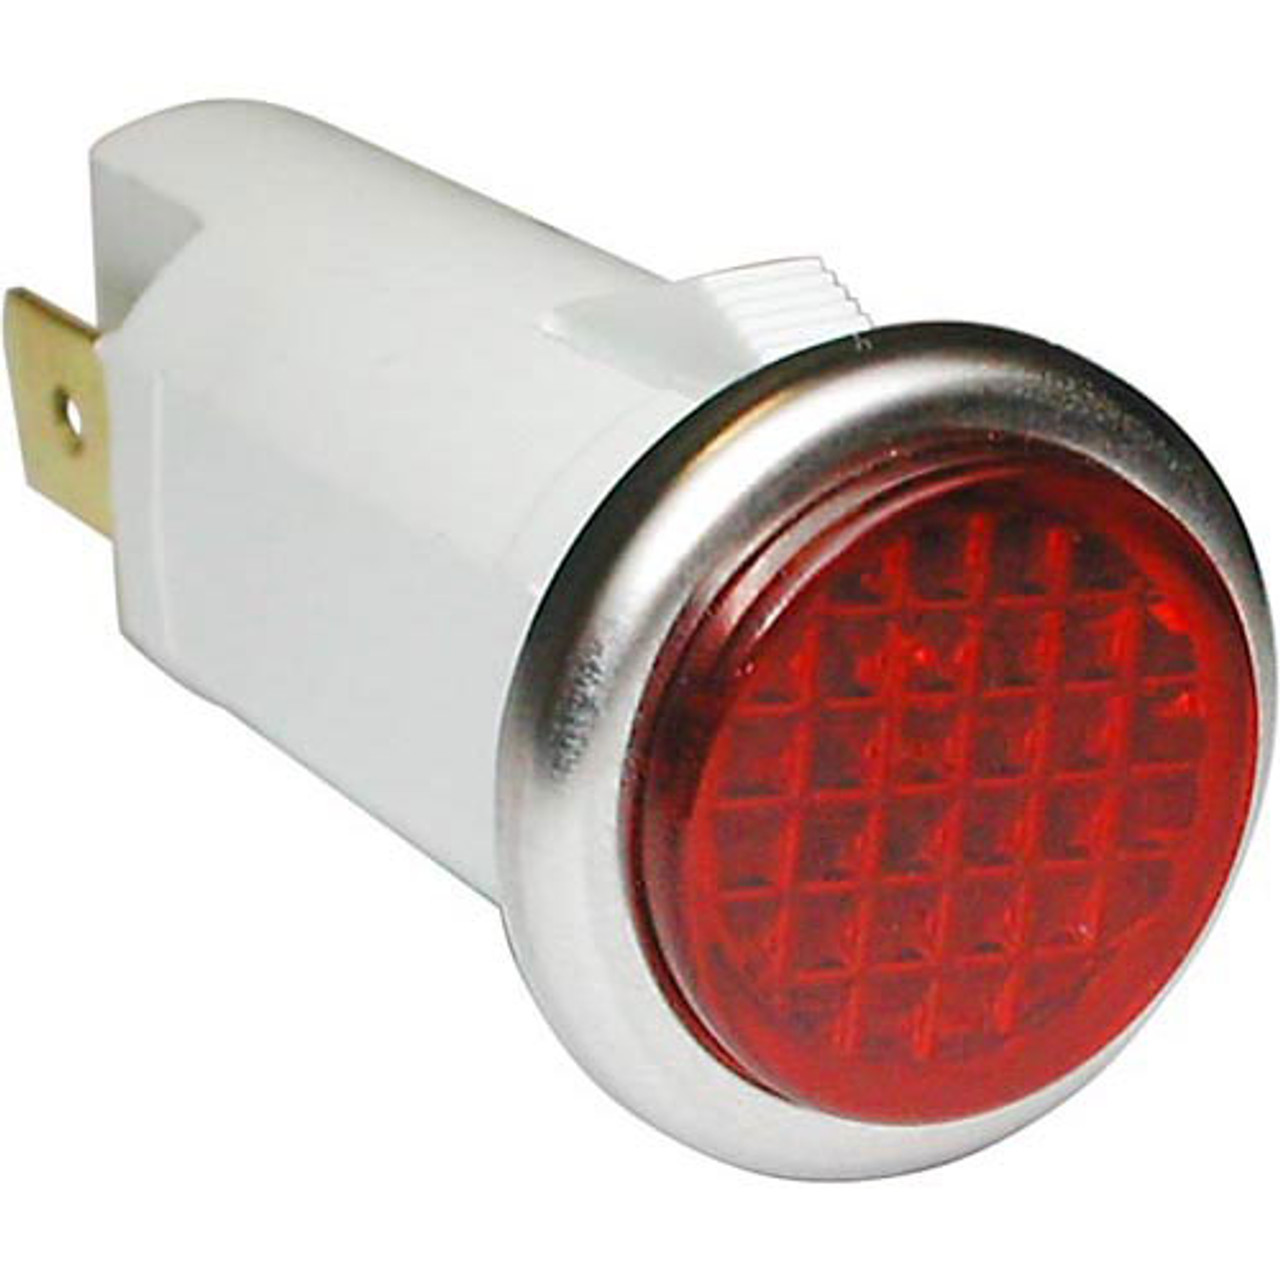 Signal Light 1/2" Red 250V - Replacement Part For Star Mfg 51157